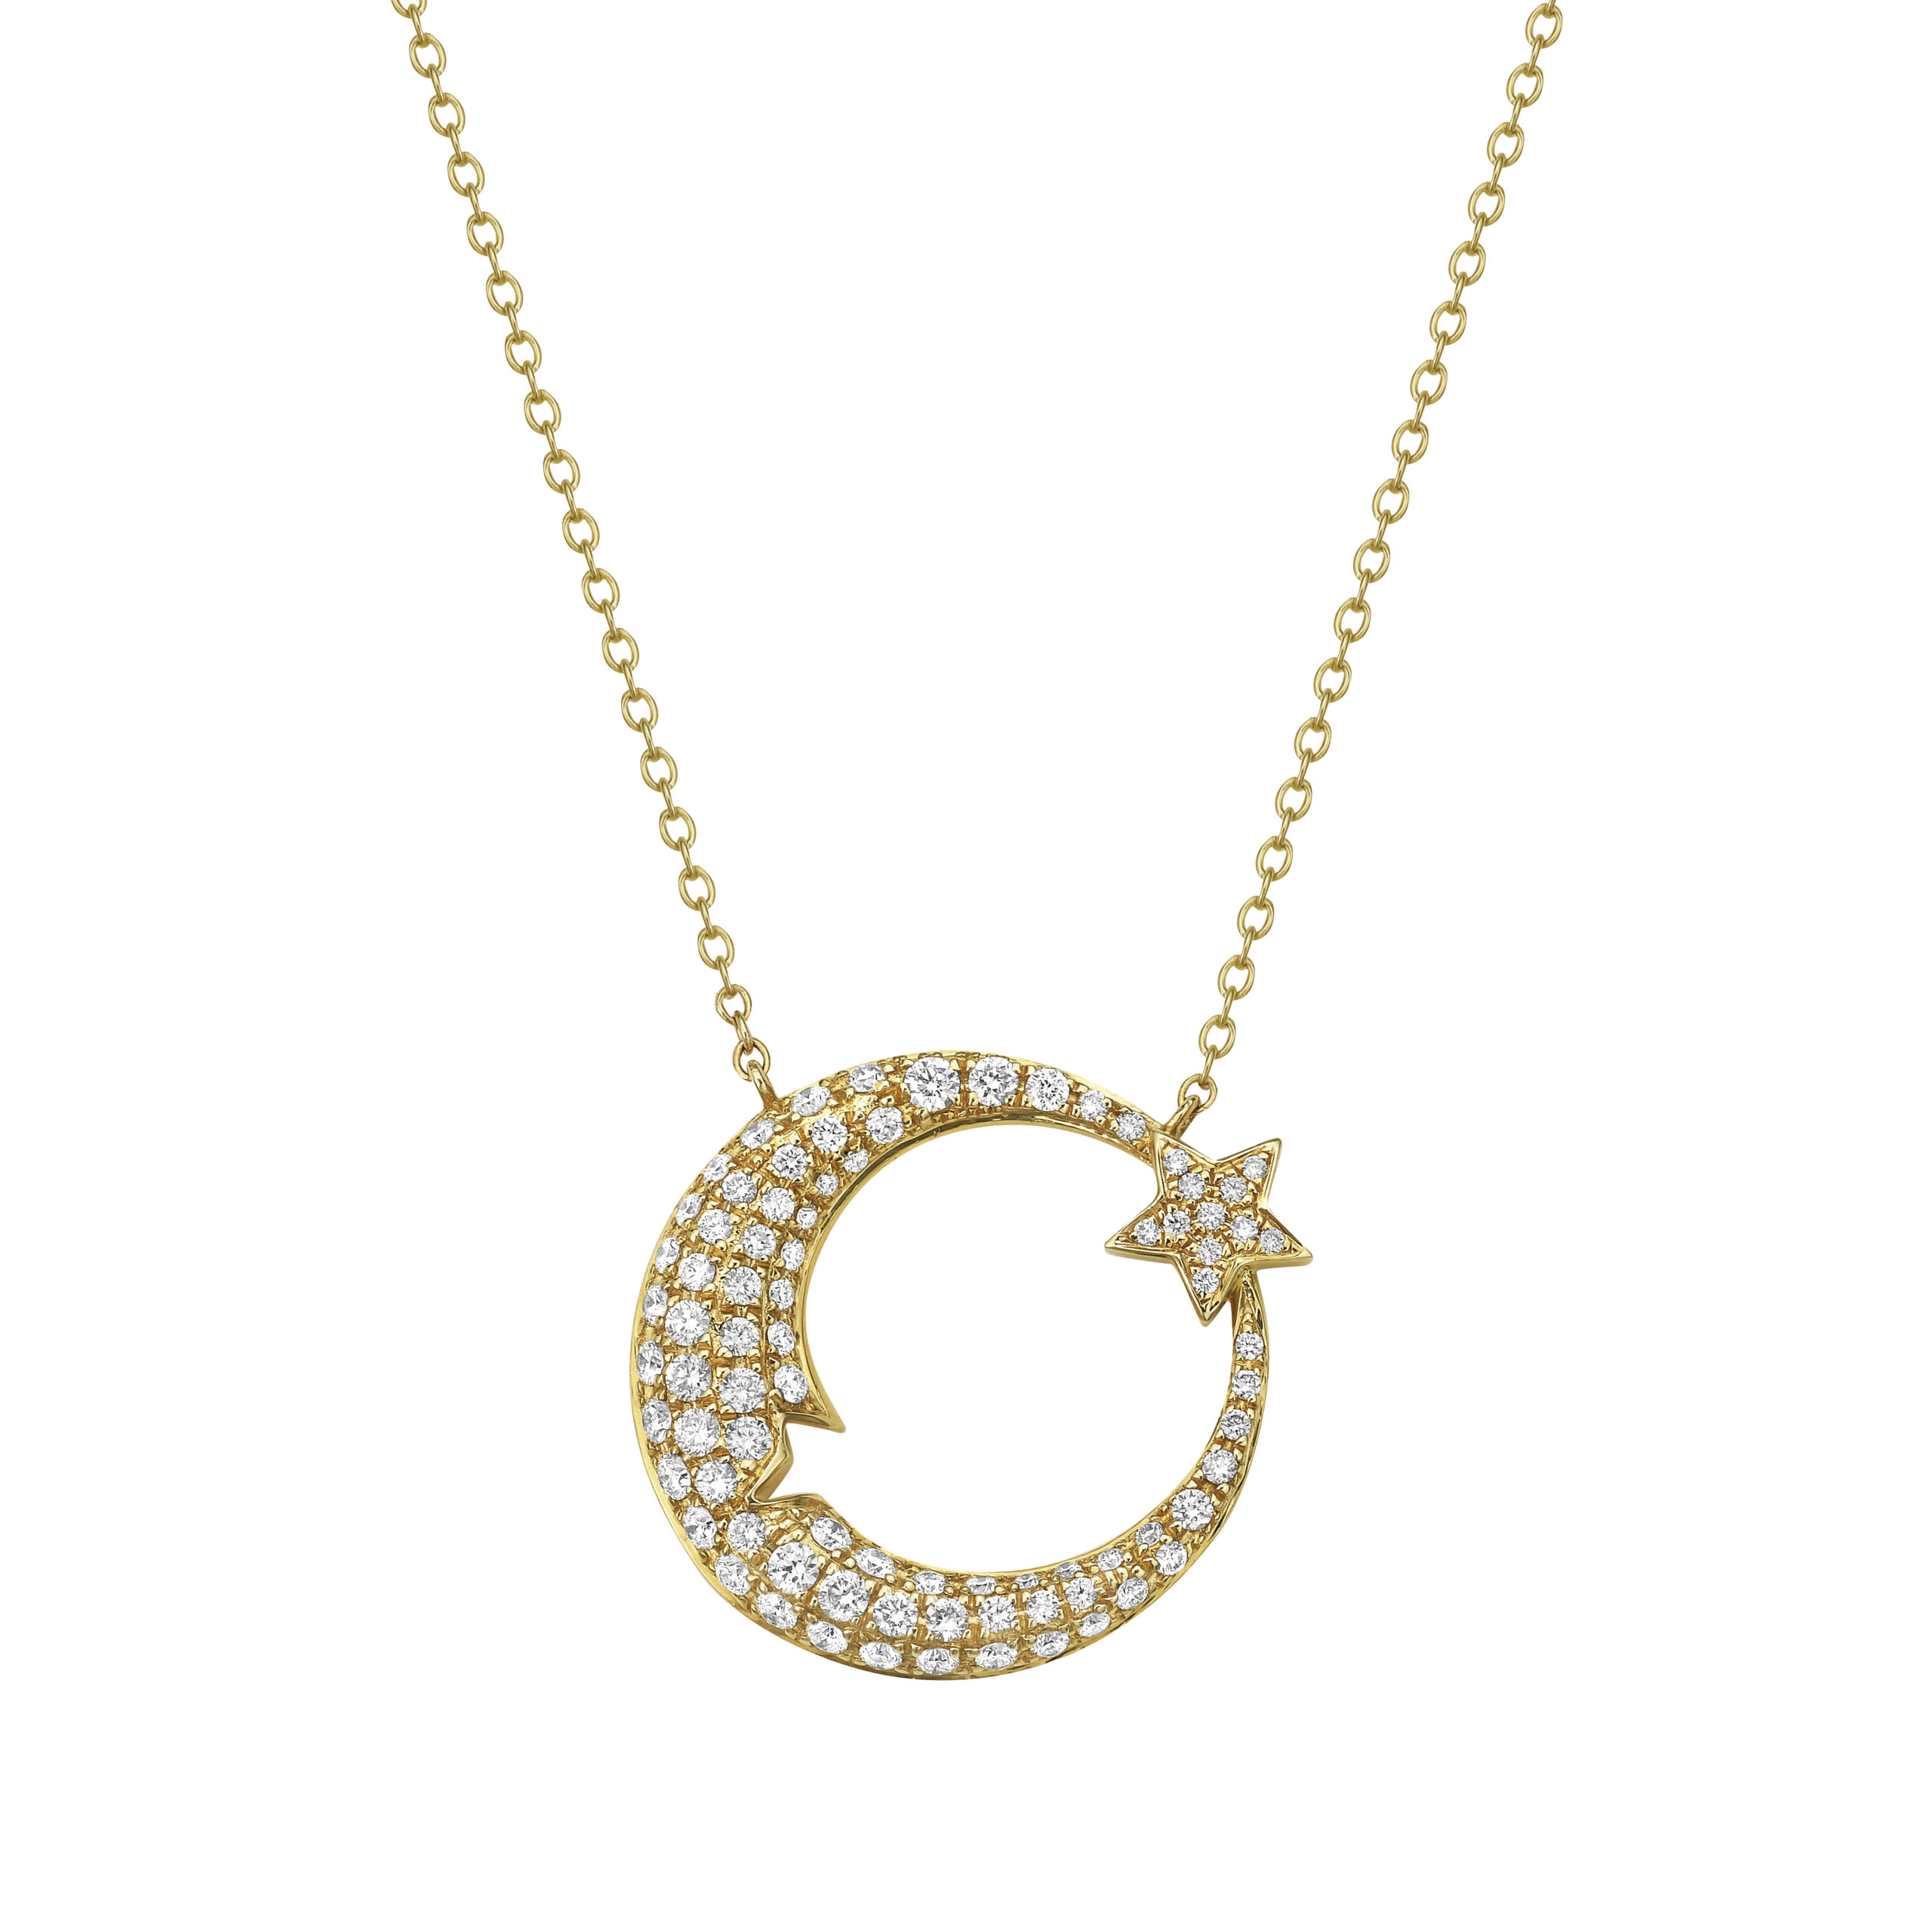 Buy 22kt Star-moon Charm Pendant Necklace by Zariin Online at Aza Fashions.